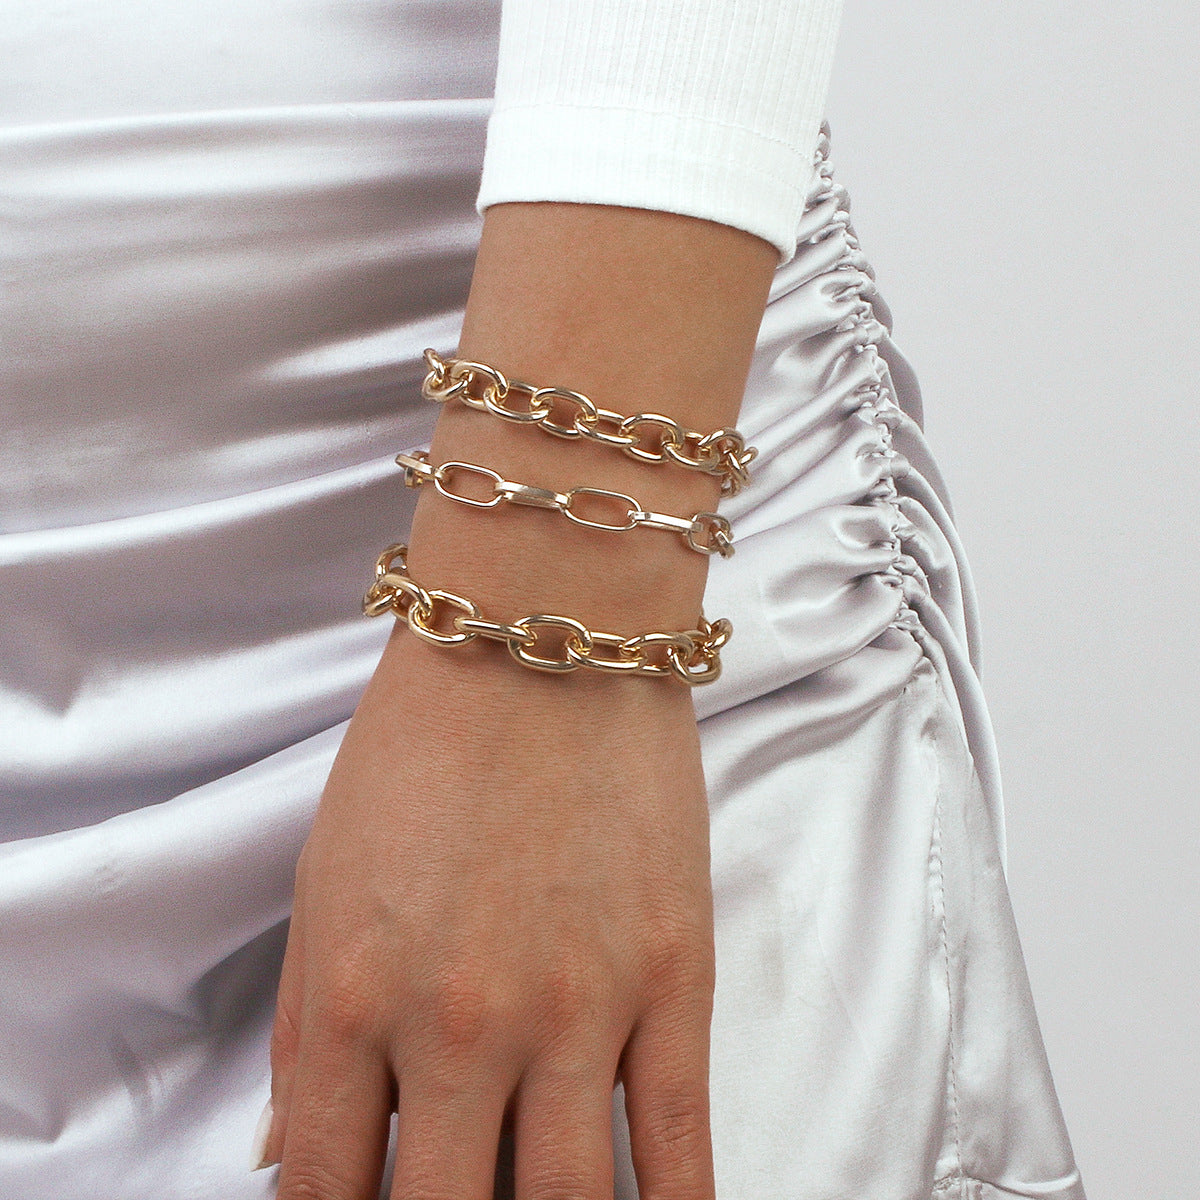 18K Gold-Plated Cable Chain Bracelet Set